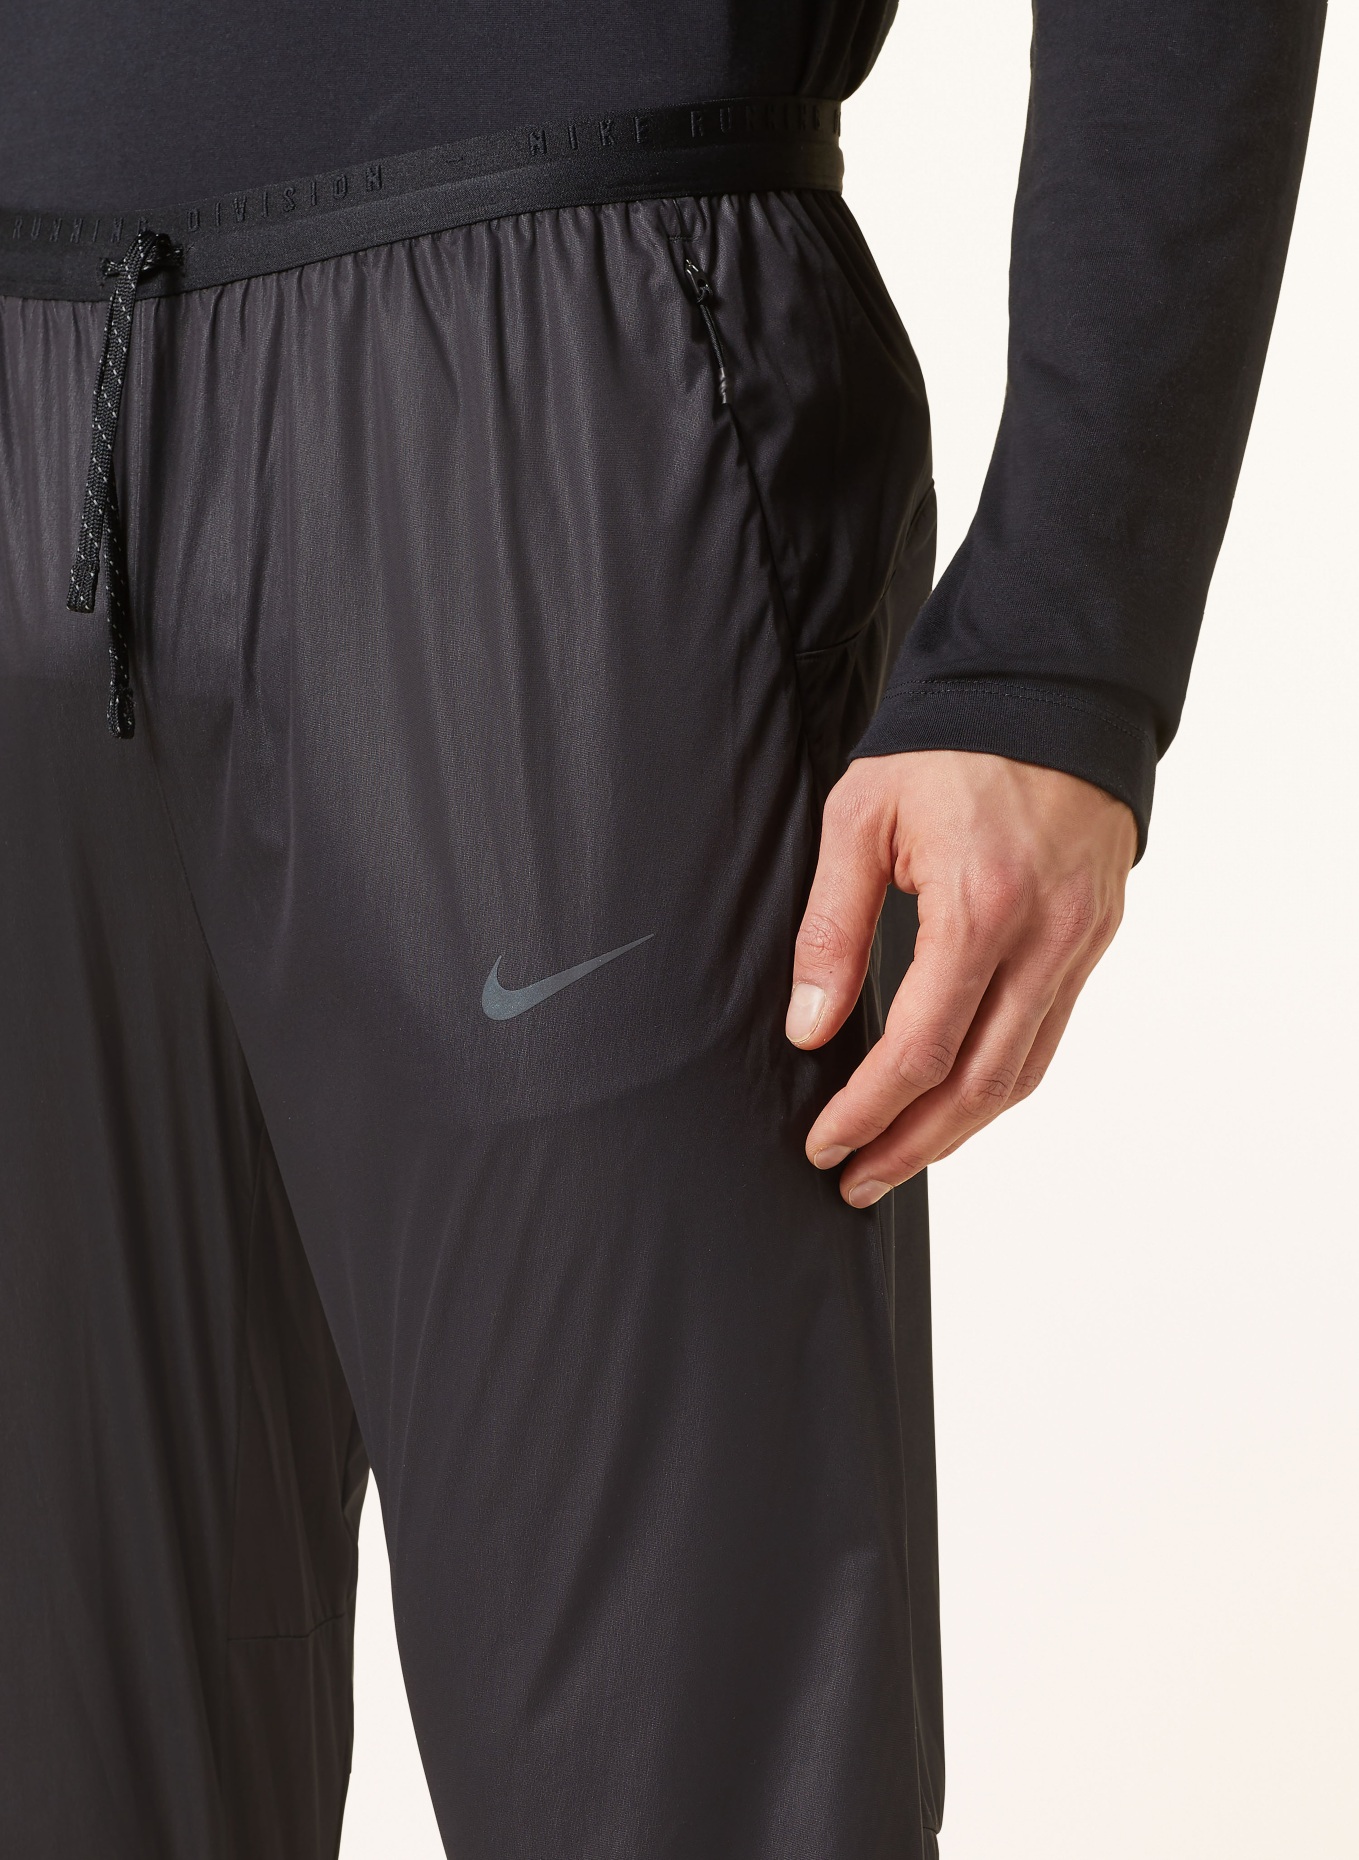 Nike Phenom Elite Running Trousers Size Medium Green Teal New DQ4745-309 | Running  trousers, Active wear leggings, Trousers